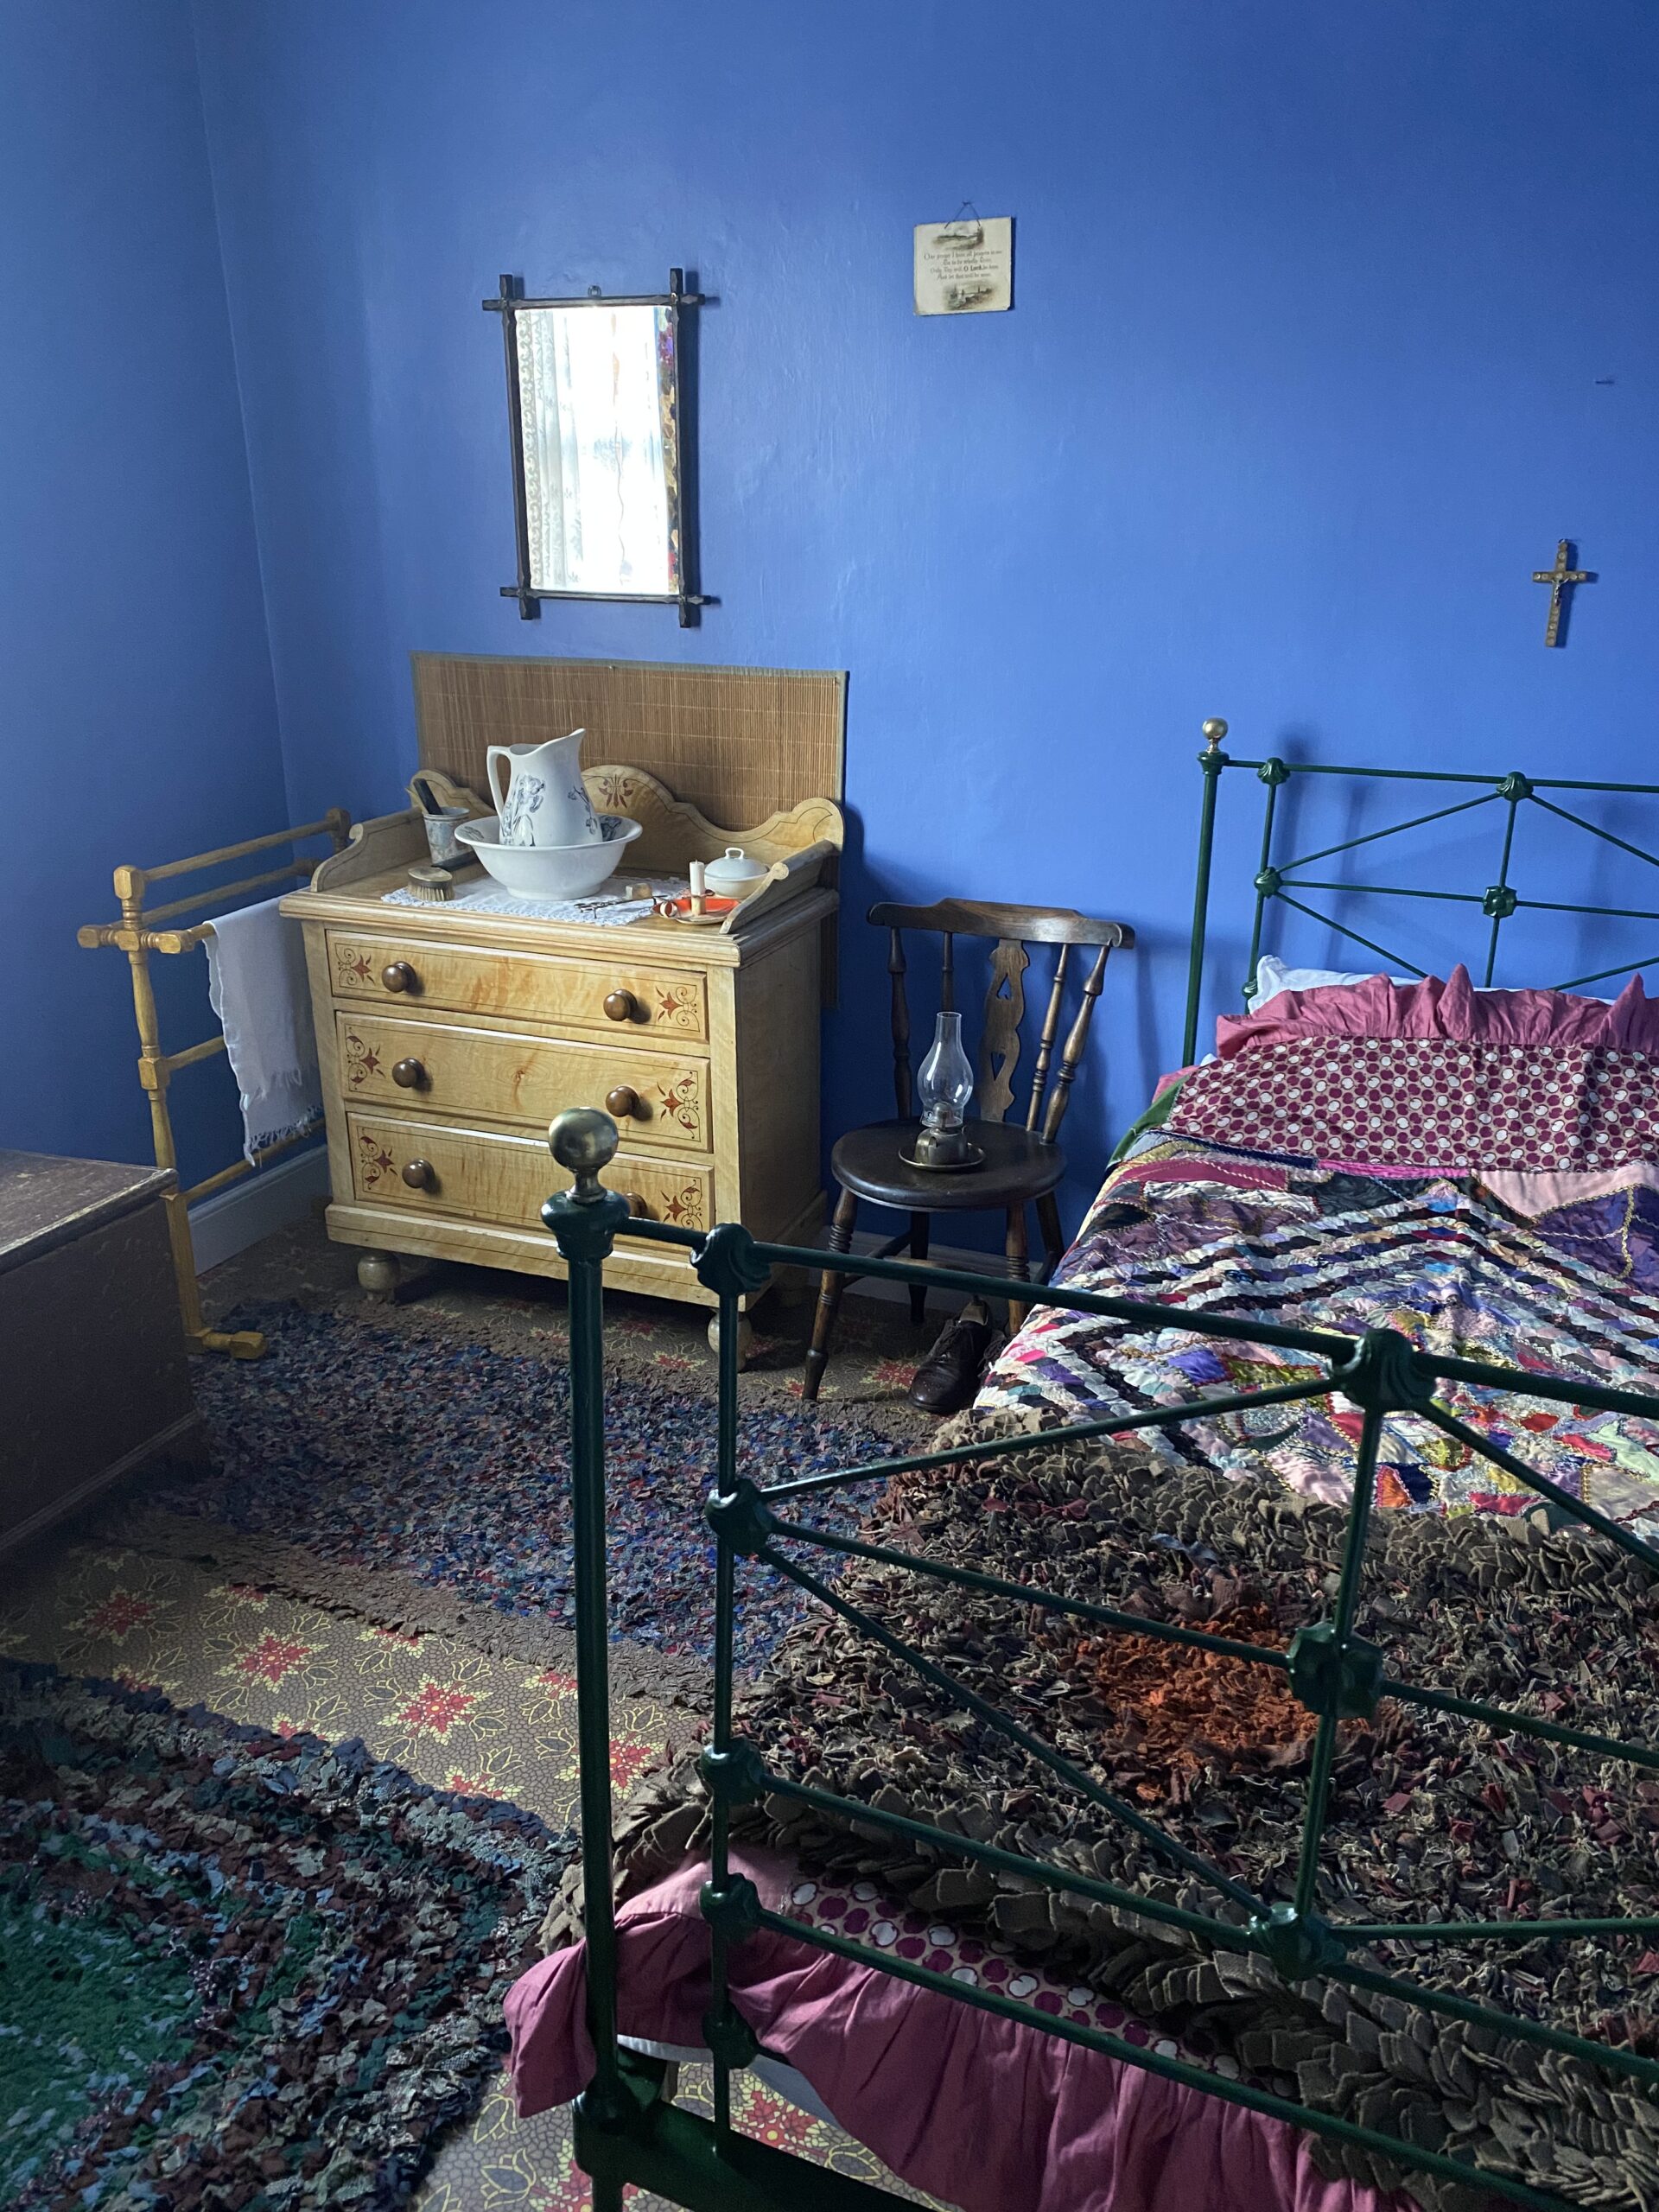 Victorian bedroom with blue painted walls and rag rugs